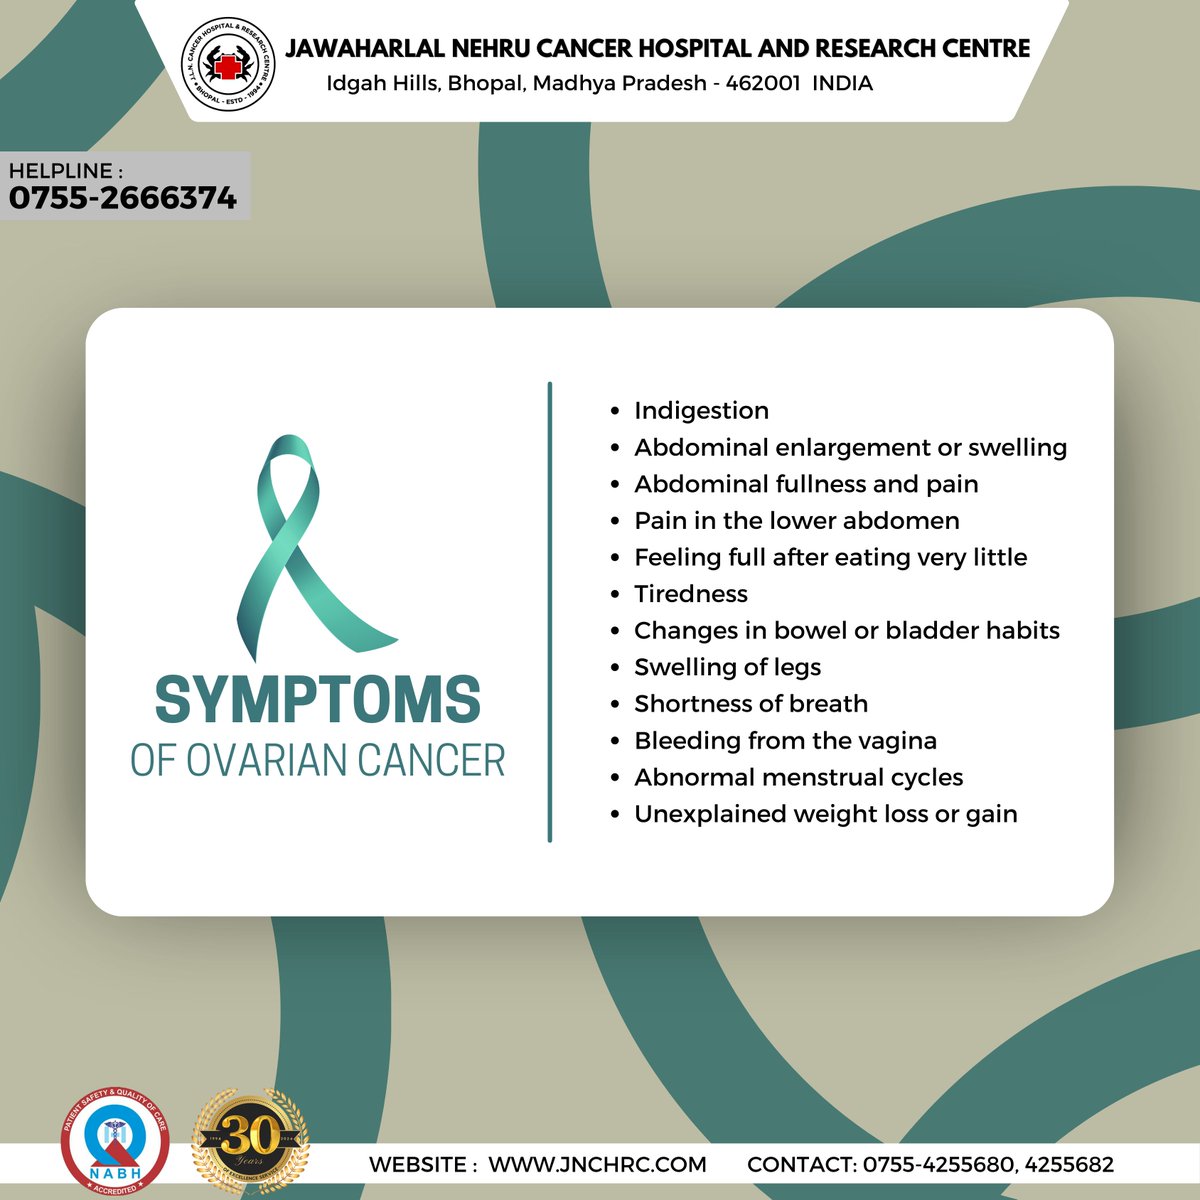 If you're experiencing any of these symptoms, it's important to get screened. Early detection and treatment of ovarian cancer can improve your chances of a successful outcome.

#ovarian #cáncer #getscreened